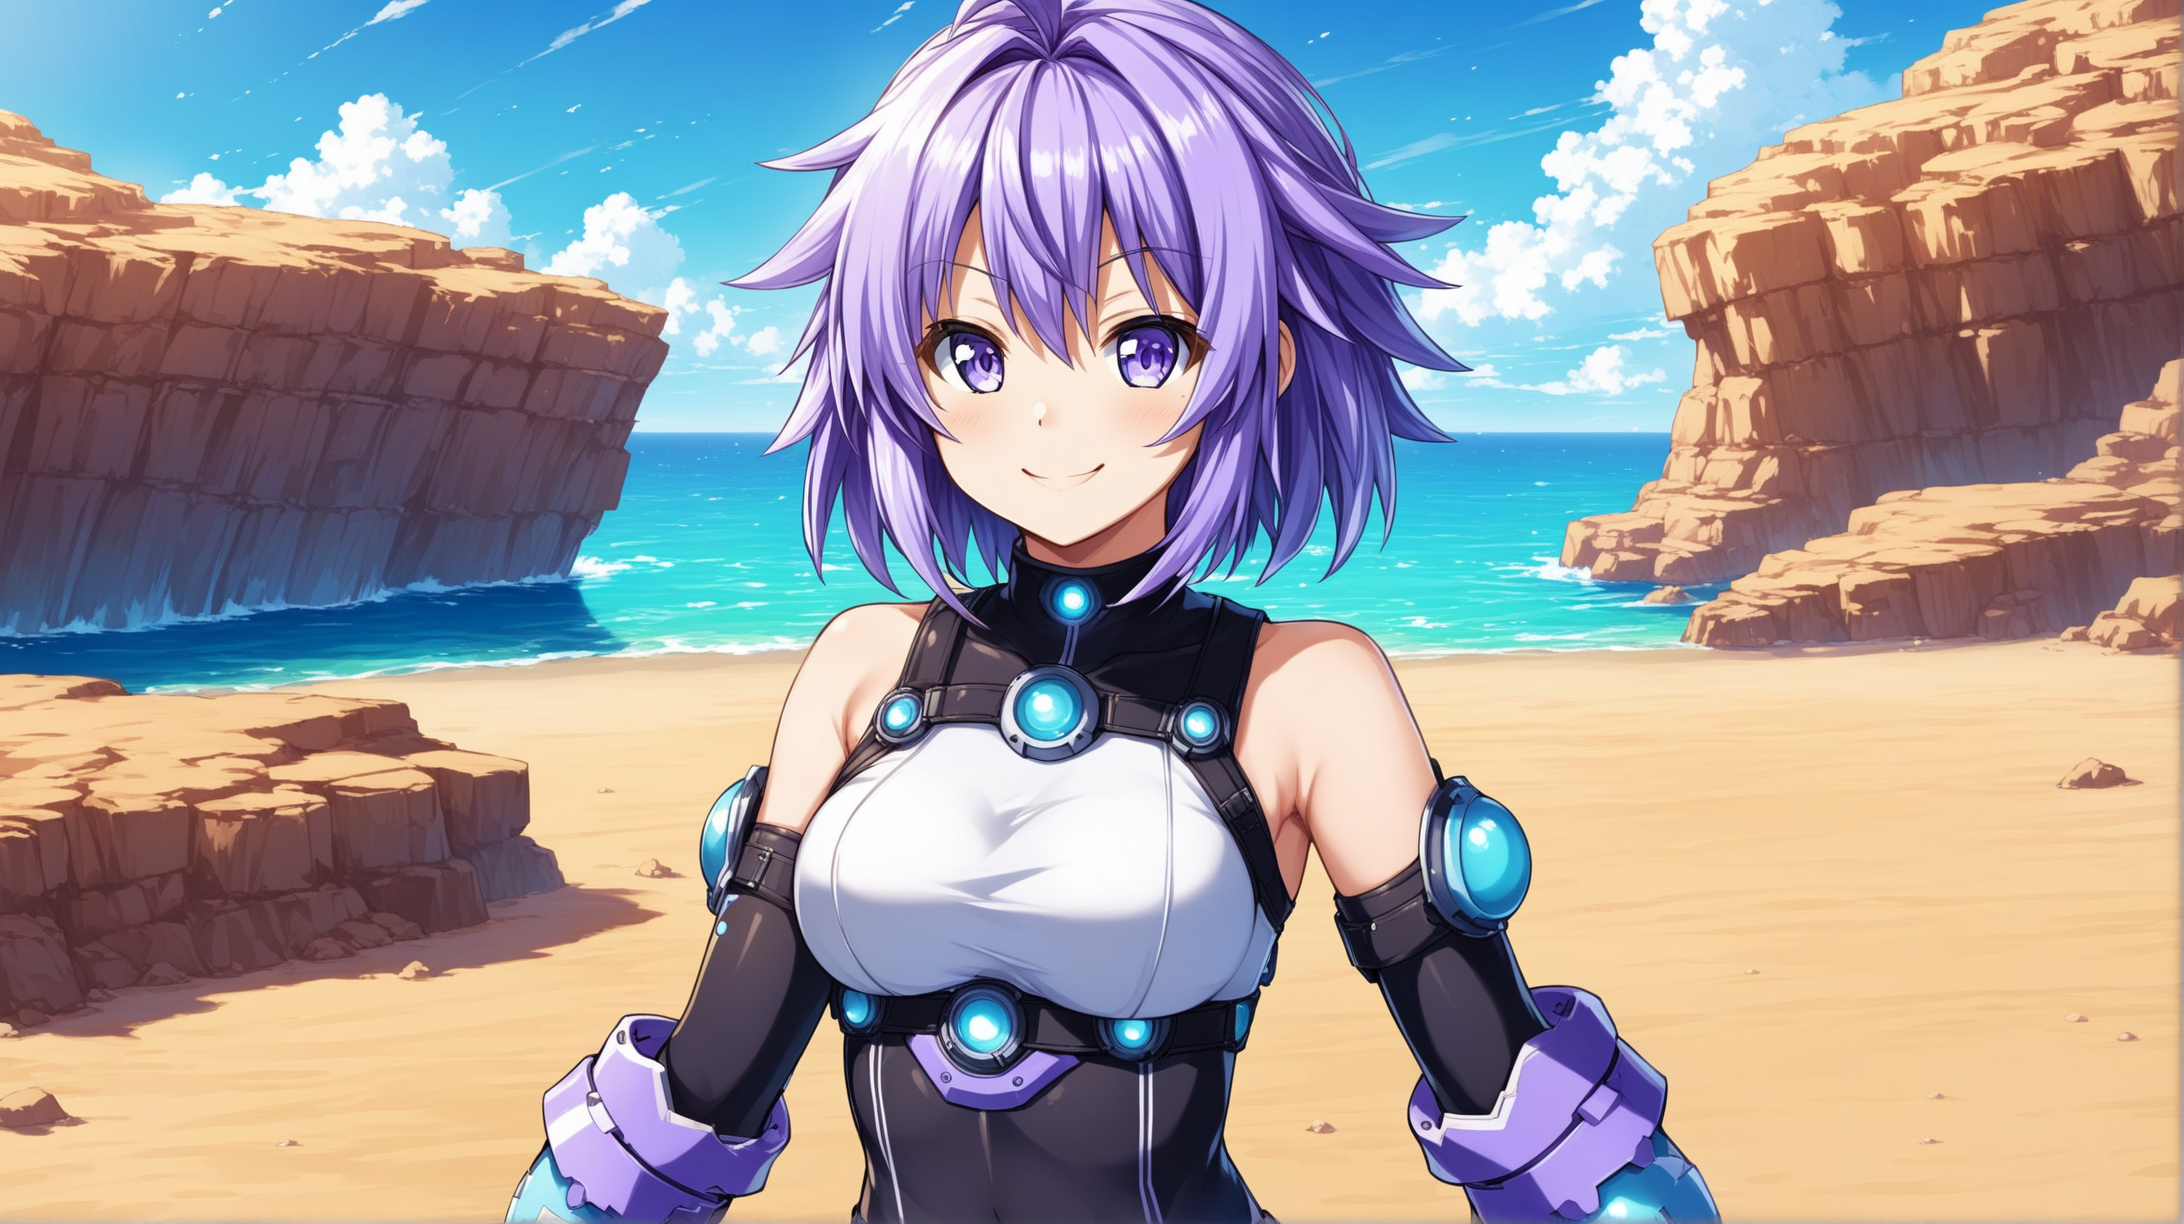 Neptune from Hyperdimension Neptunia in Falloutinspired Attire Relaxing Outdoors with a Friendly Smile